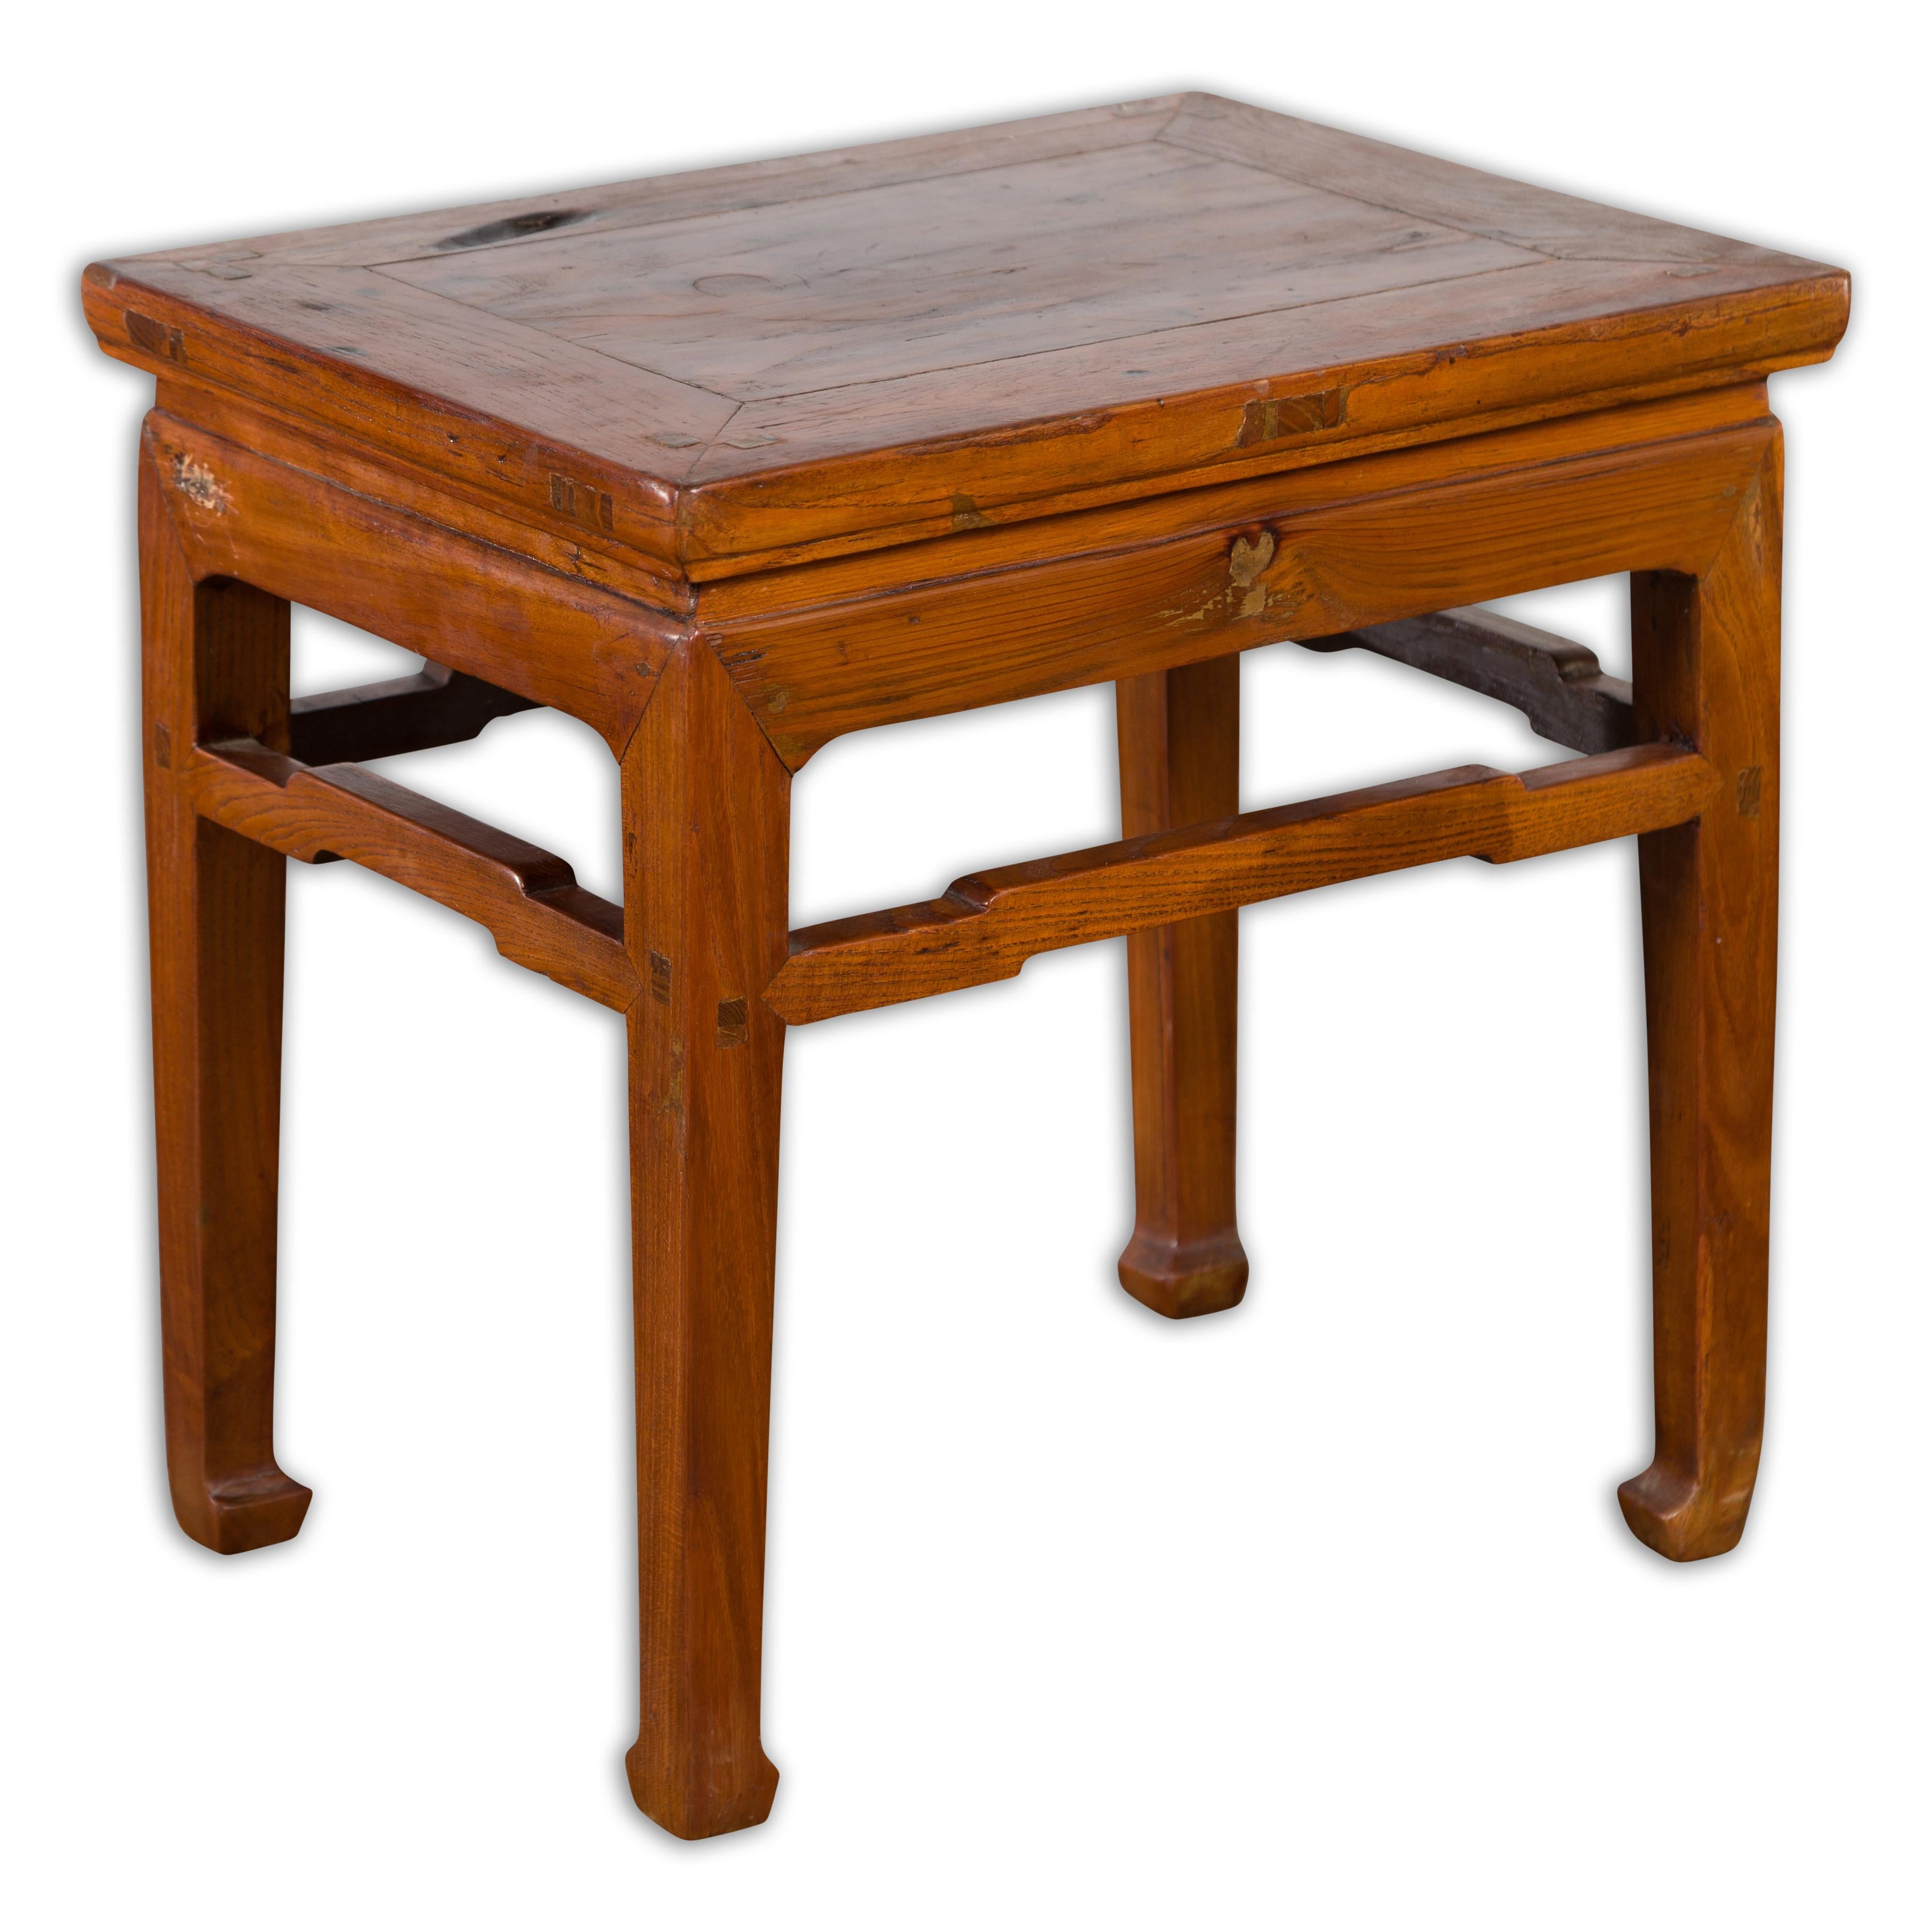 Chinese Qing Dynasty 19th Century Side Table with Humpback Stretchers For Sale 11